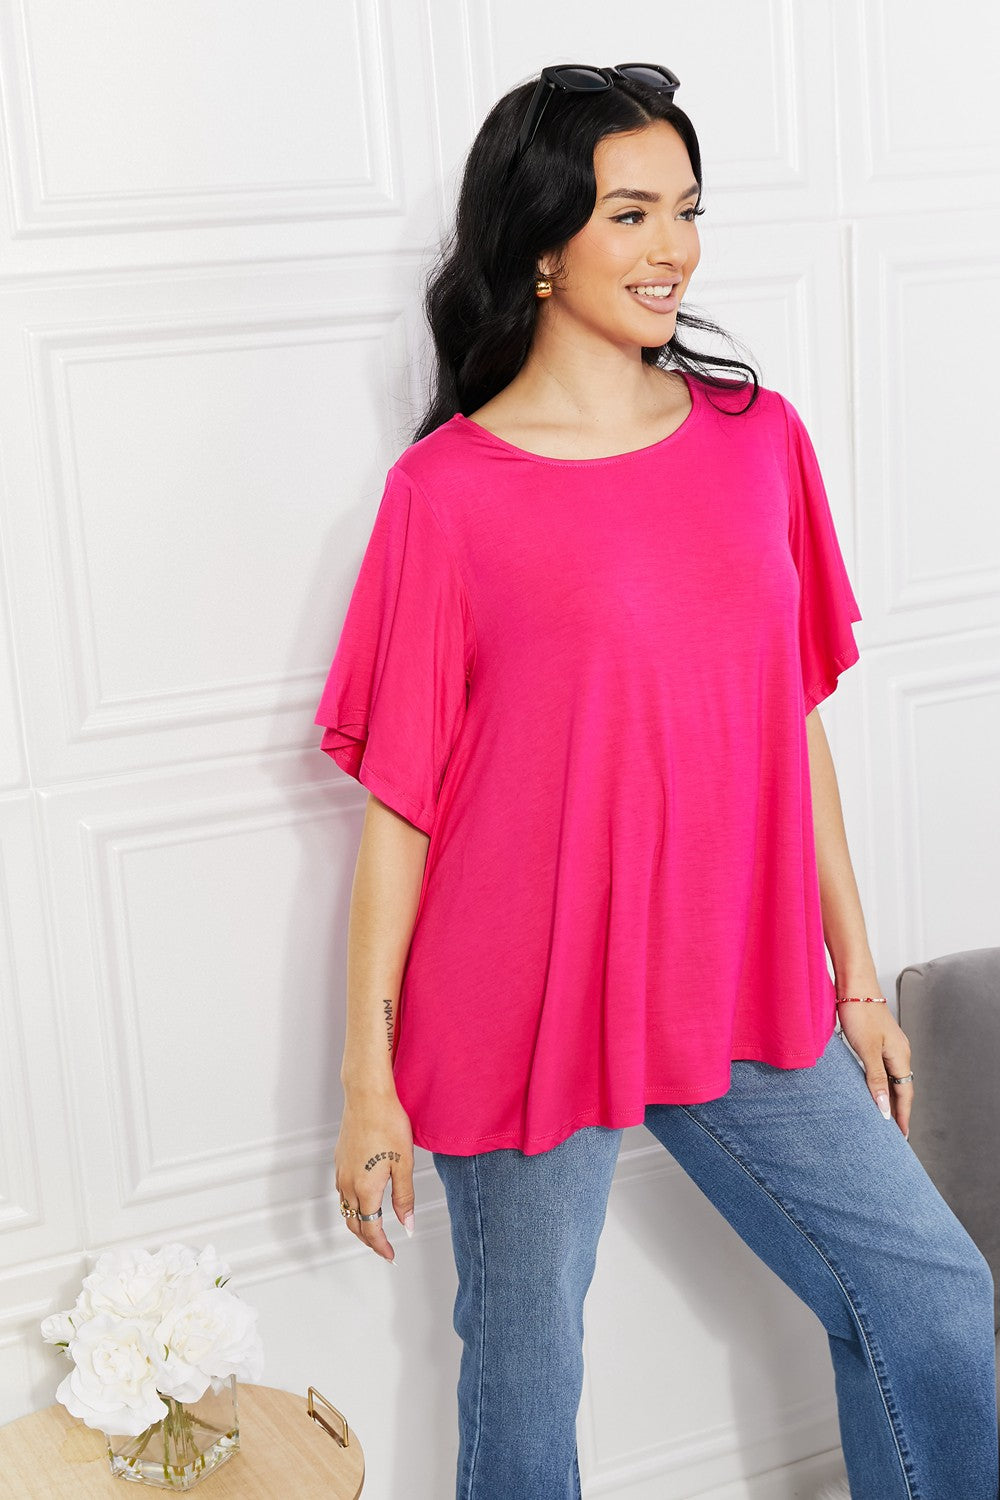 Yelete Full Size More Than Words Flutter Sleeve Top - Tigbul's Fashion